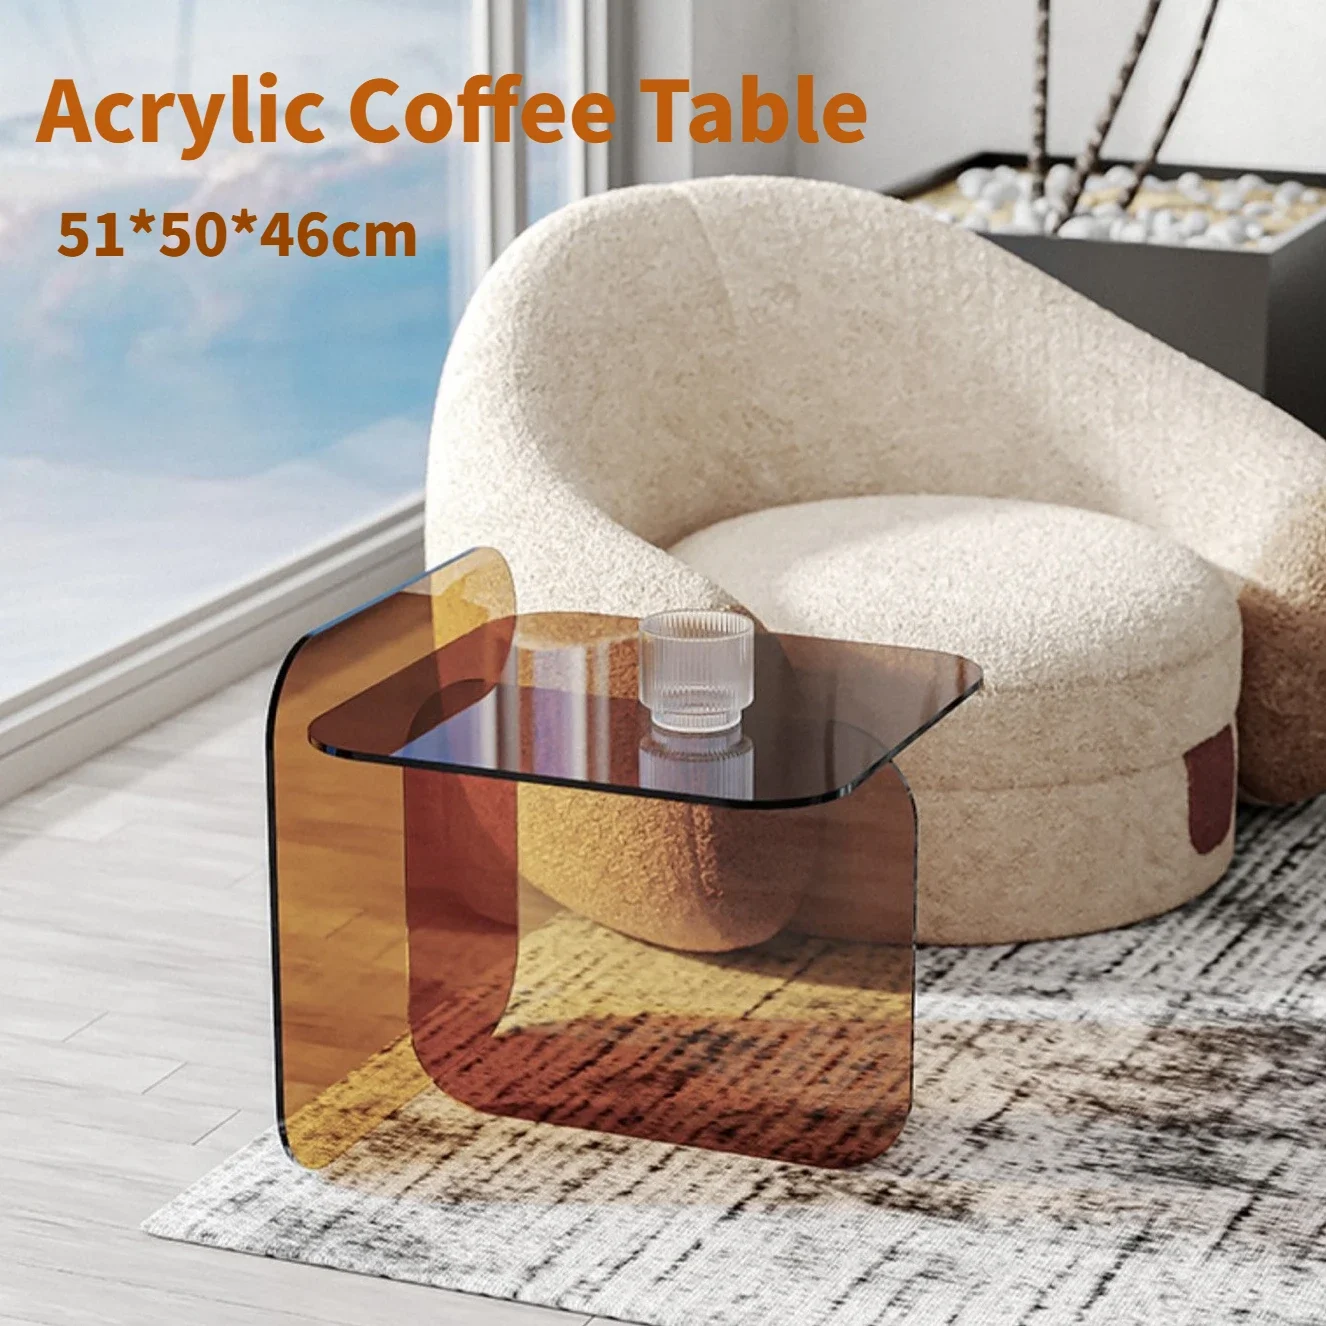 

Acrylic Transparent Side Table Living Room Coffee Table With Magazine Rack Bedroom Bedside Table Bed Reading Tables Room Decor